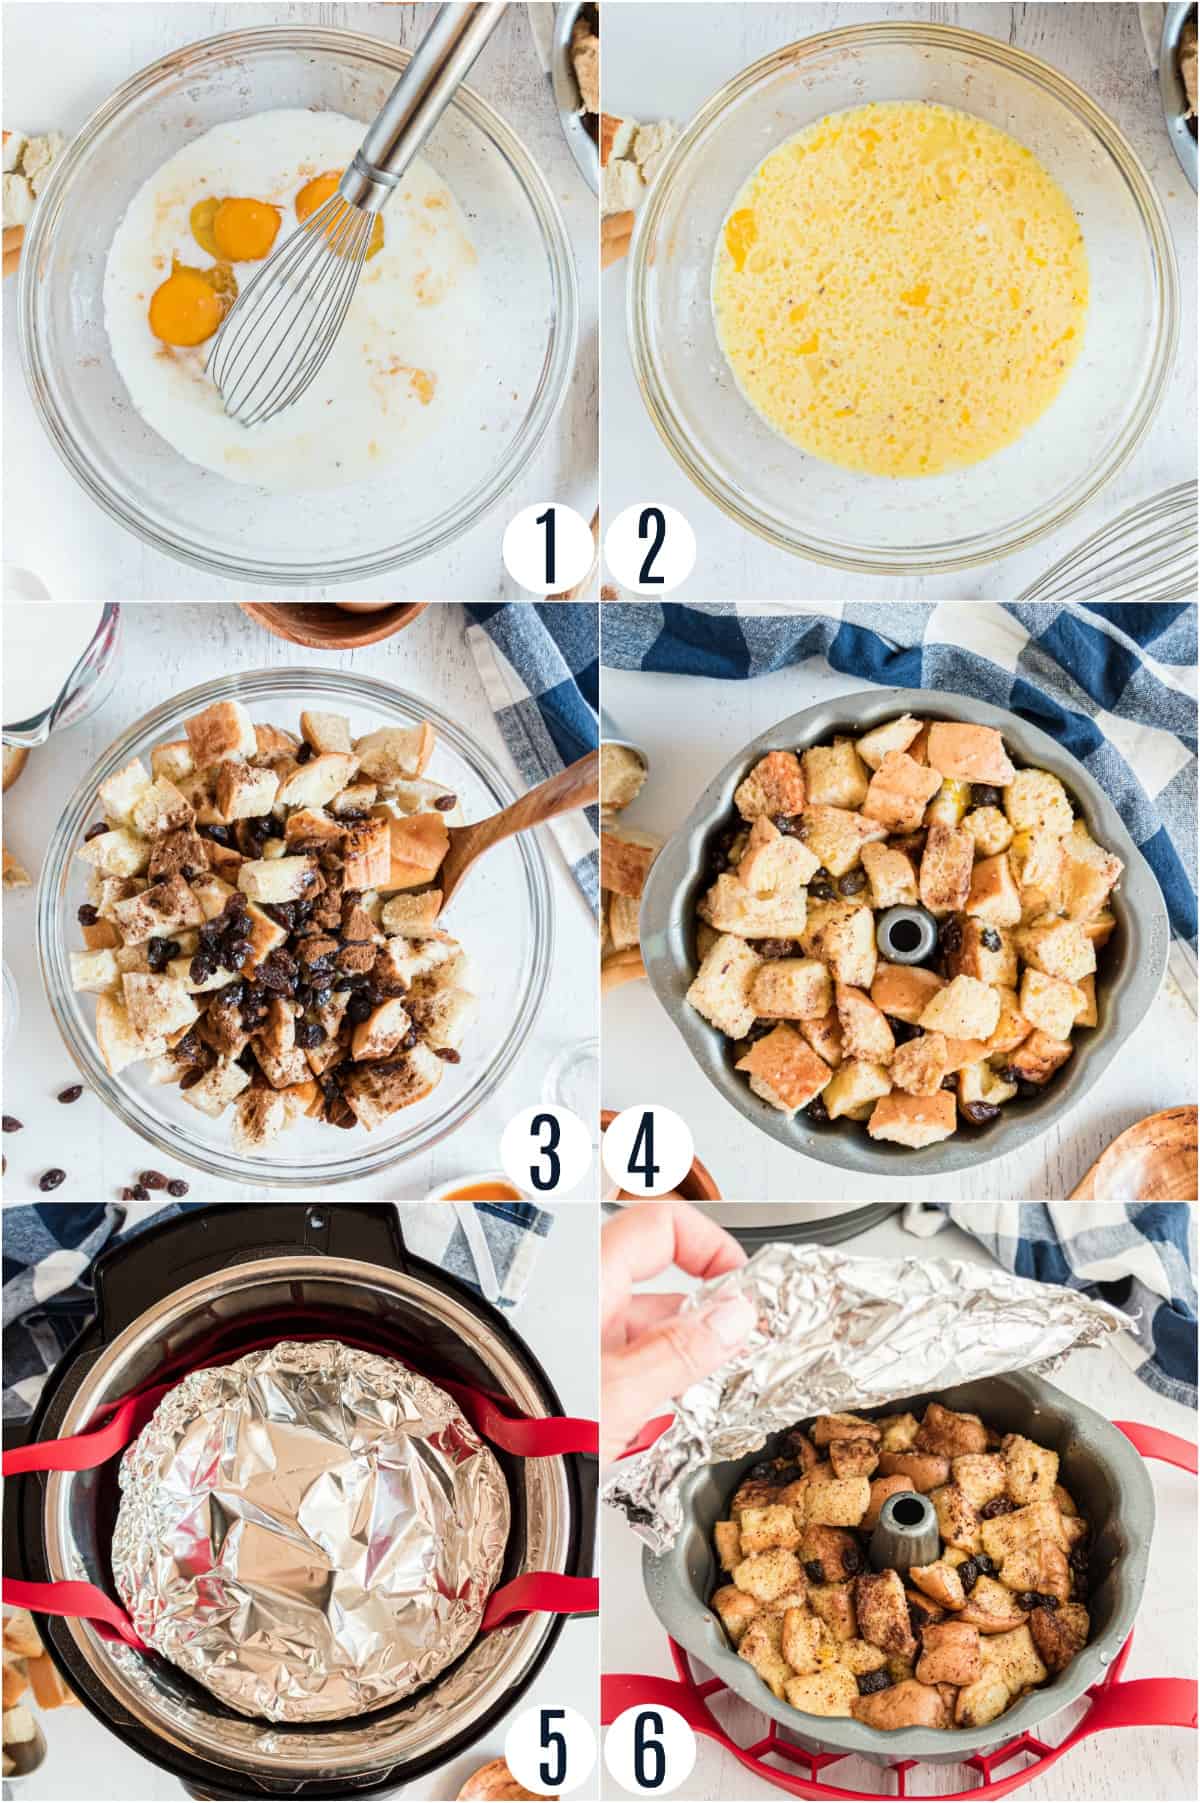 Step by step photos showing how to make bread pudding in the Instant Pot.